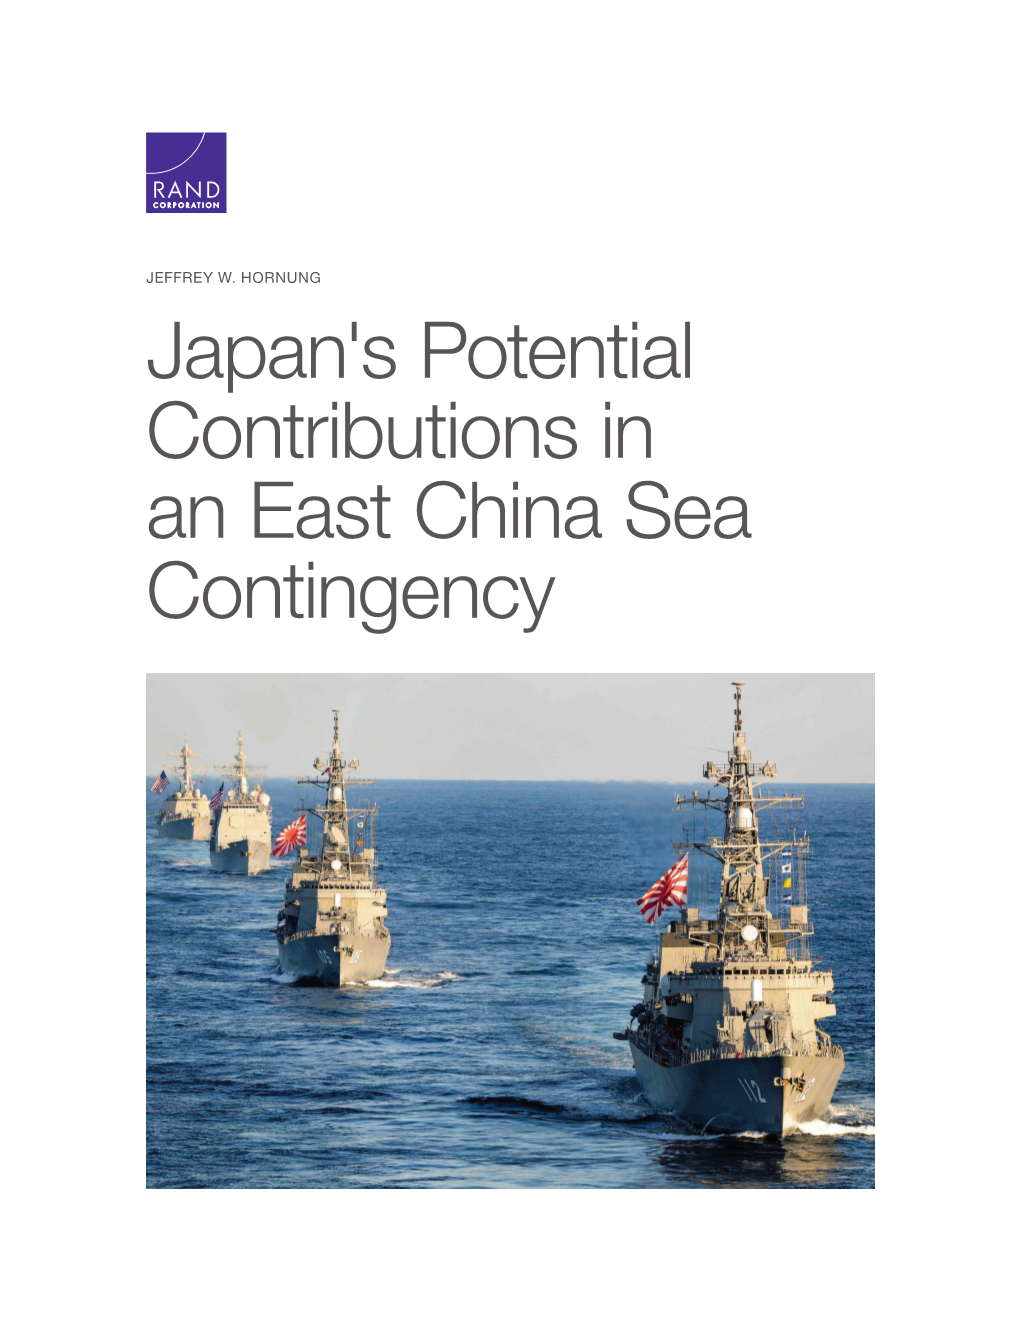 Japan's Potential Contributions in an East China Sea Contingency­ for More Information on This Publication, Visit